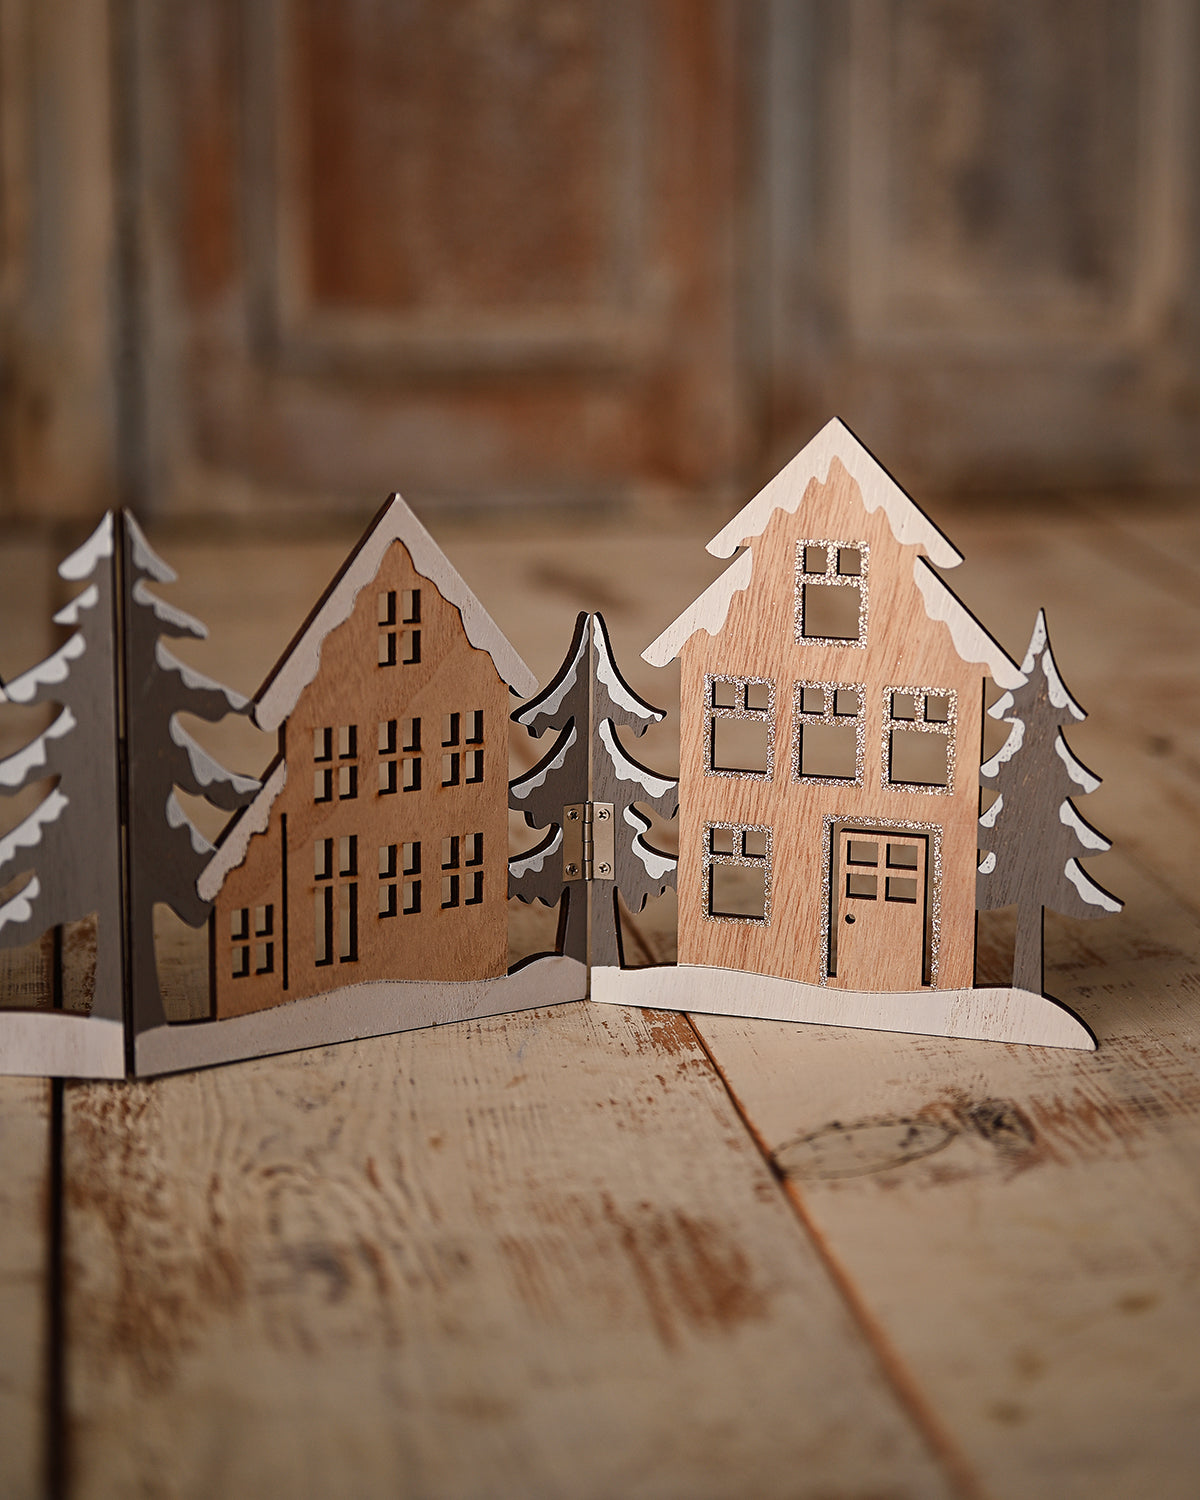 Henka - Decorative wooden houses with trees